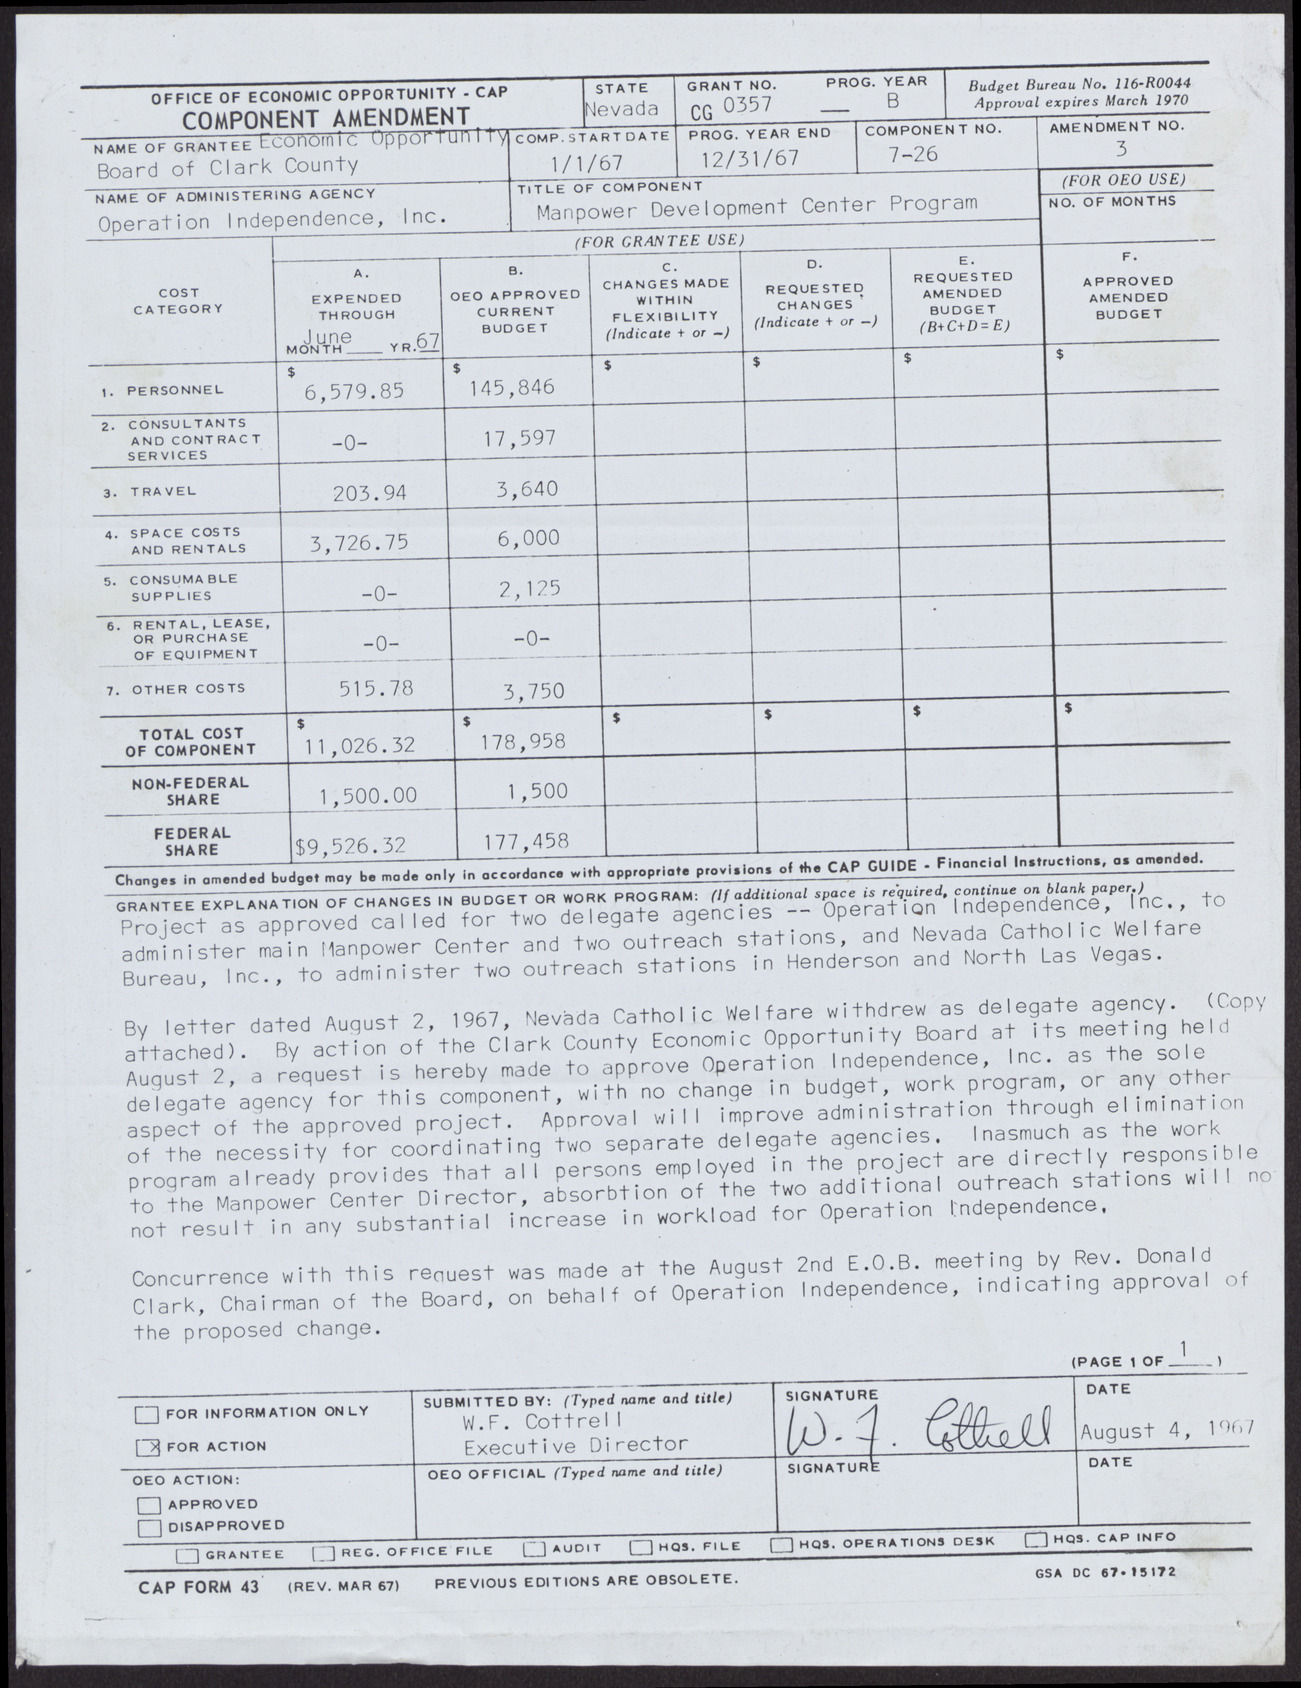 Copy of approved CAP form (2 pages), August 4, 1967